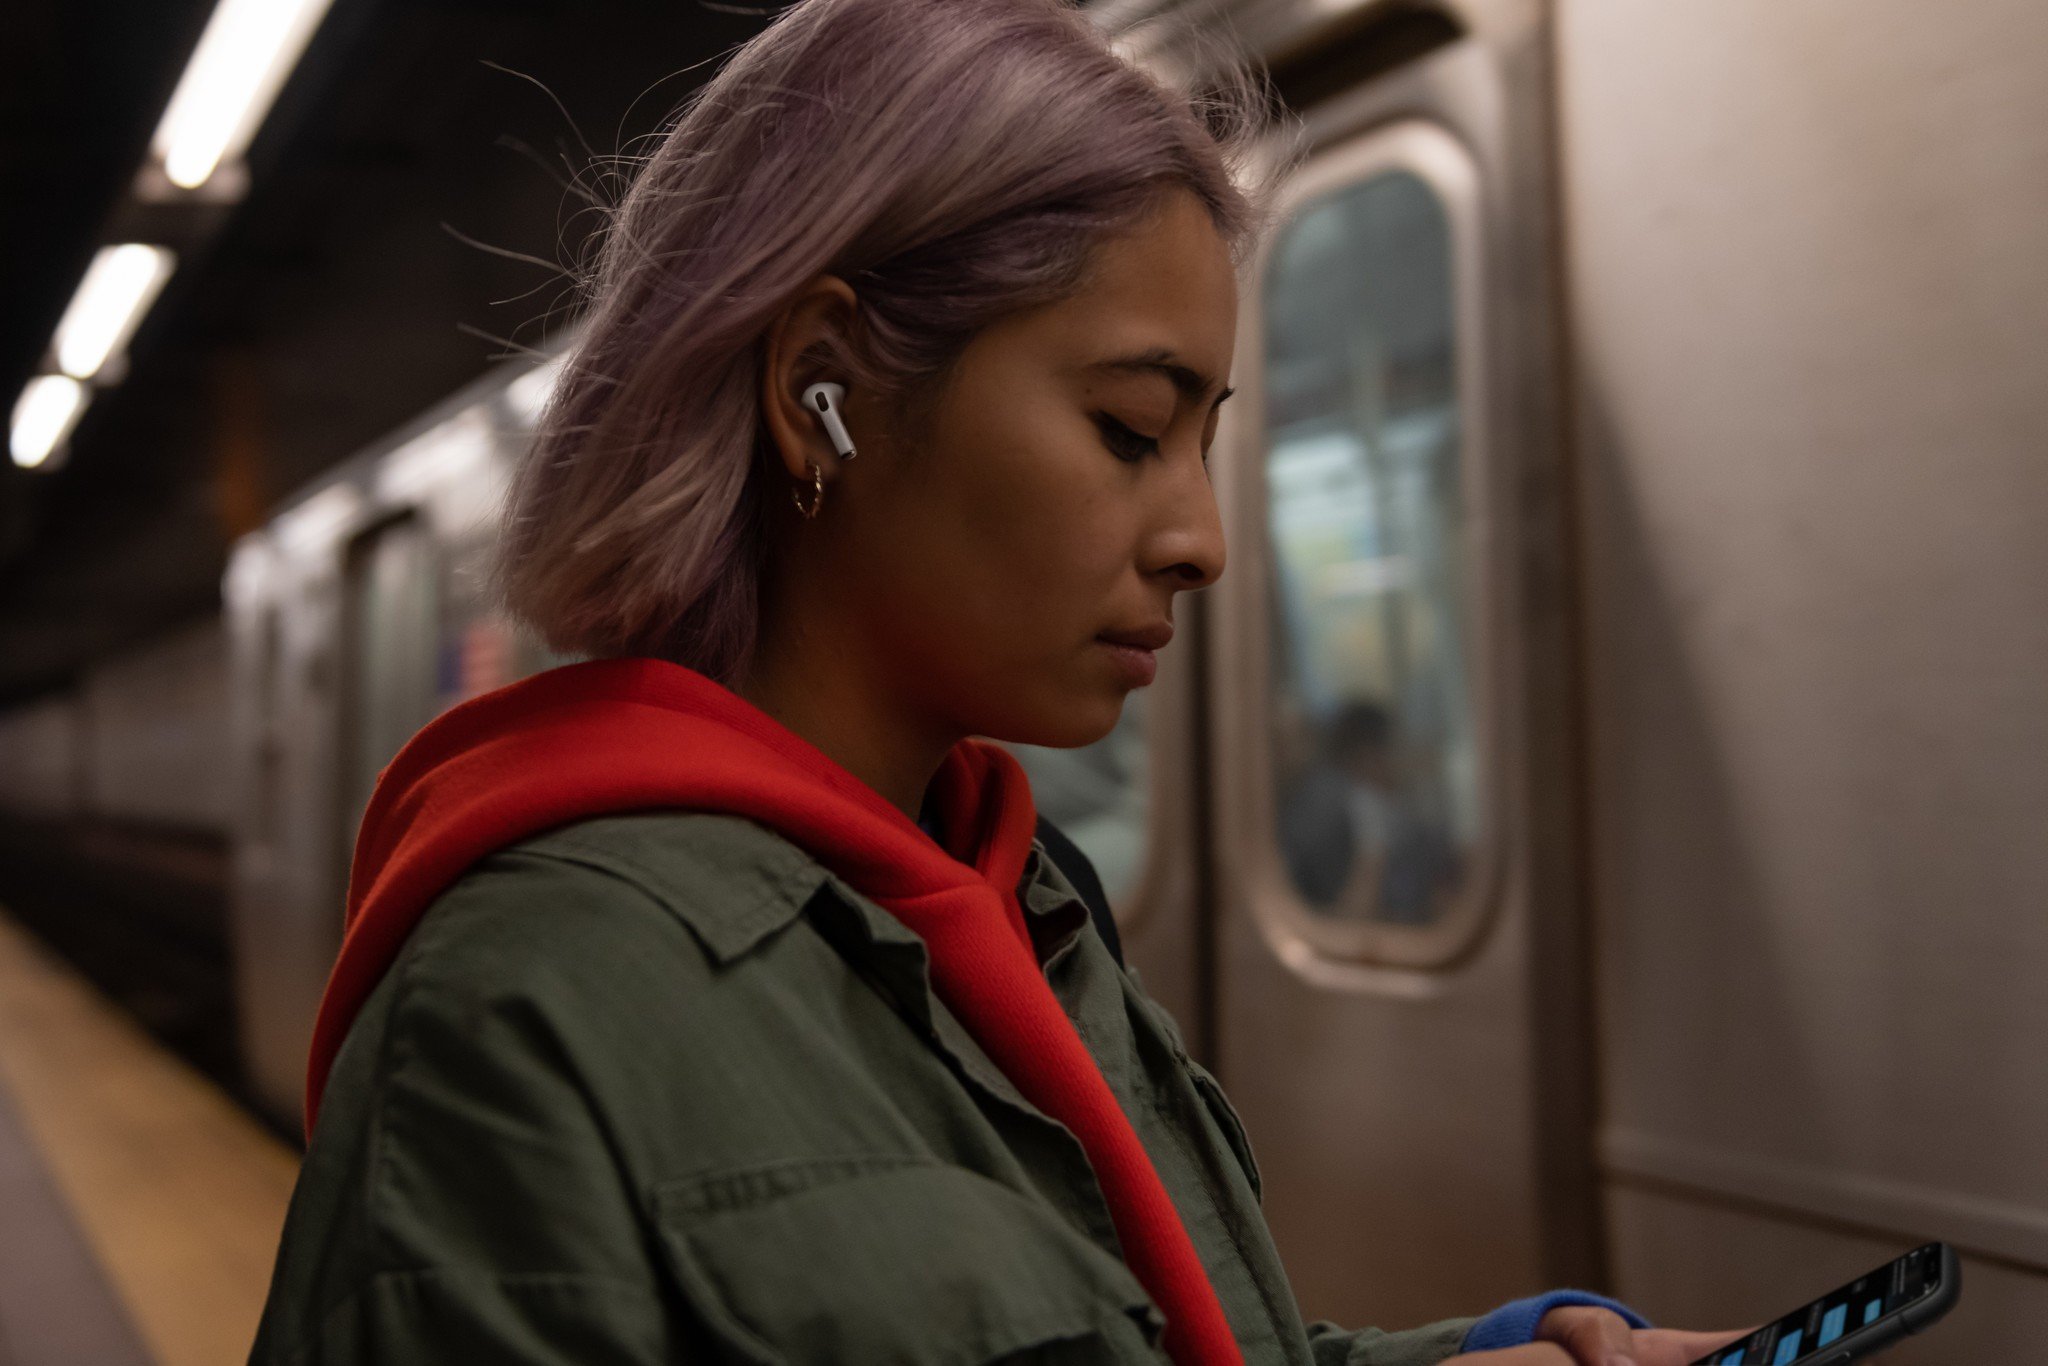 Woman wears AirPods Pro while waiting in train station